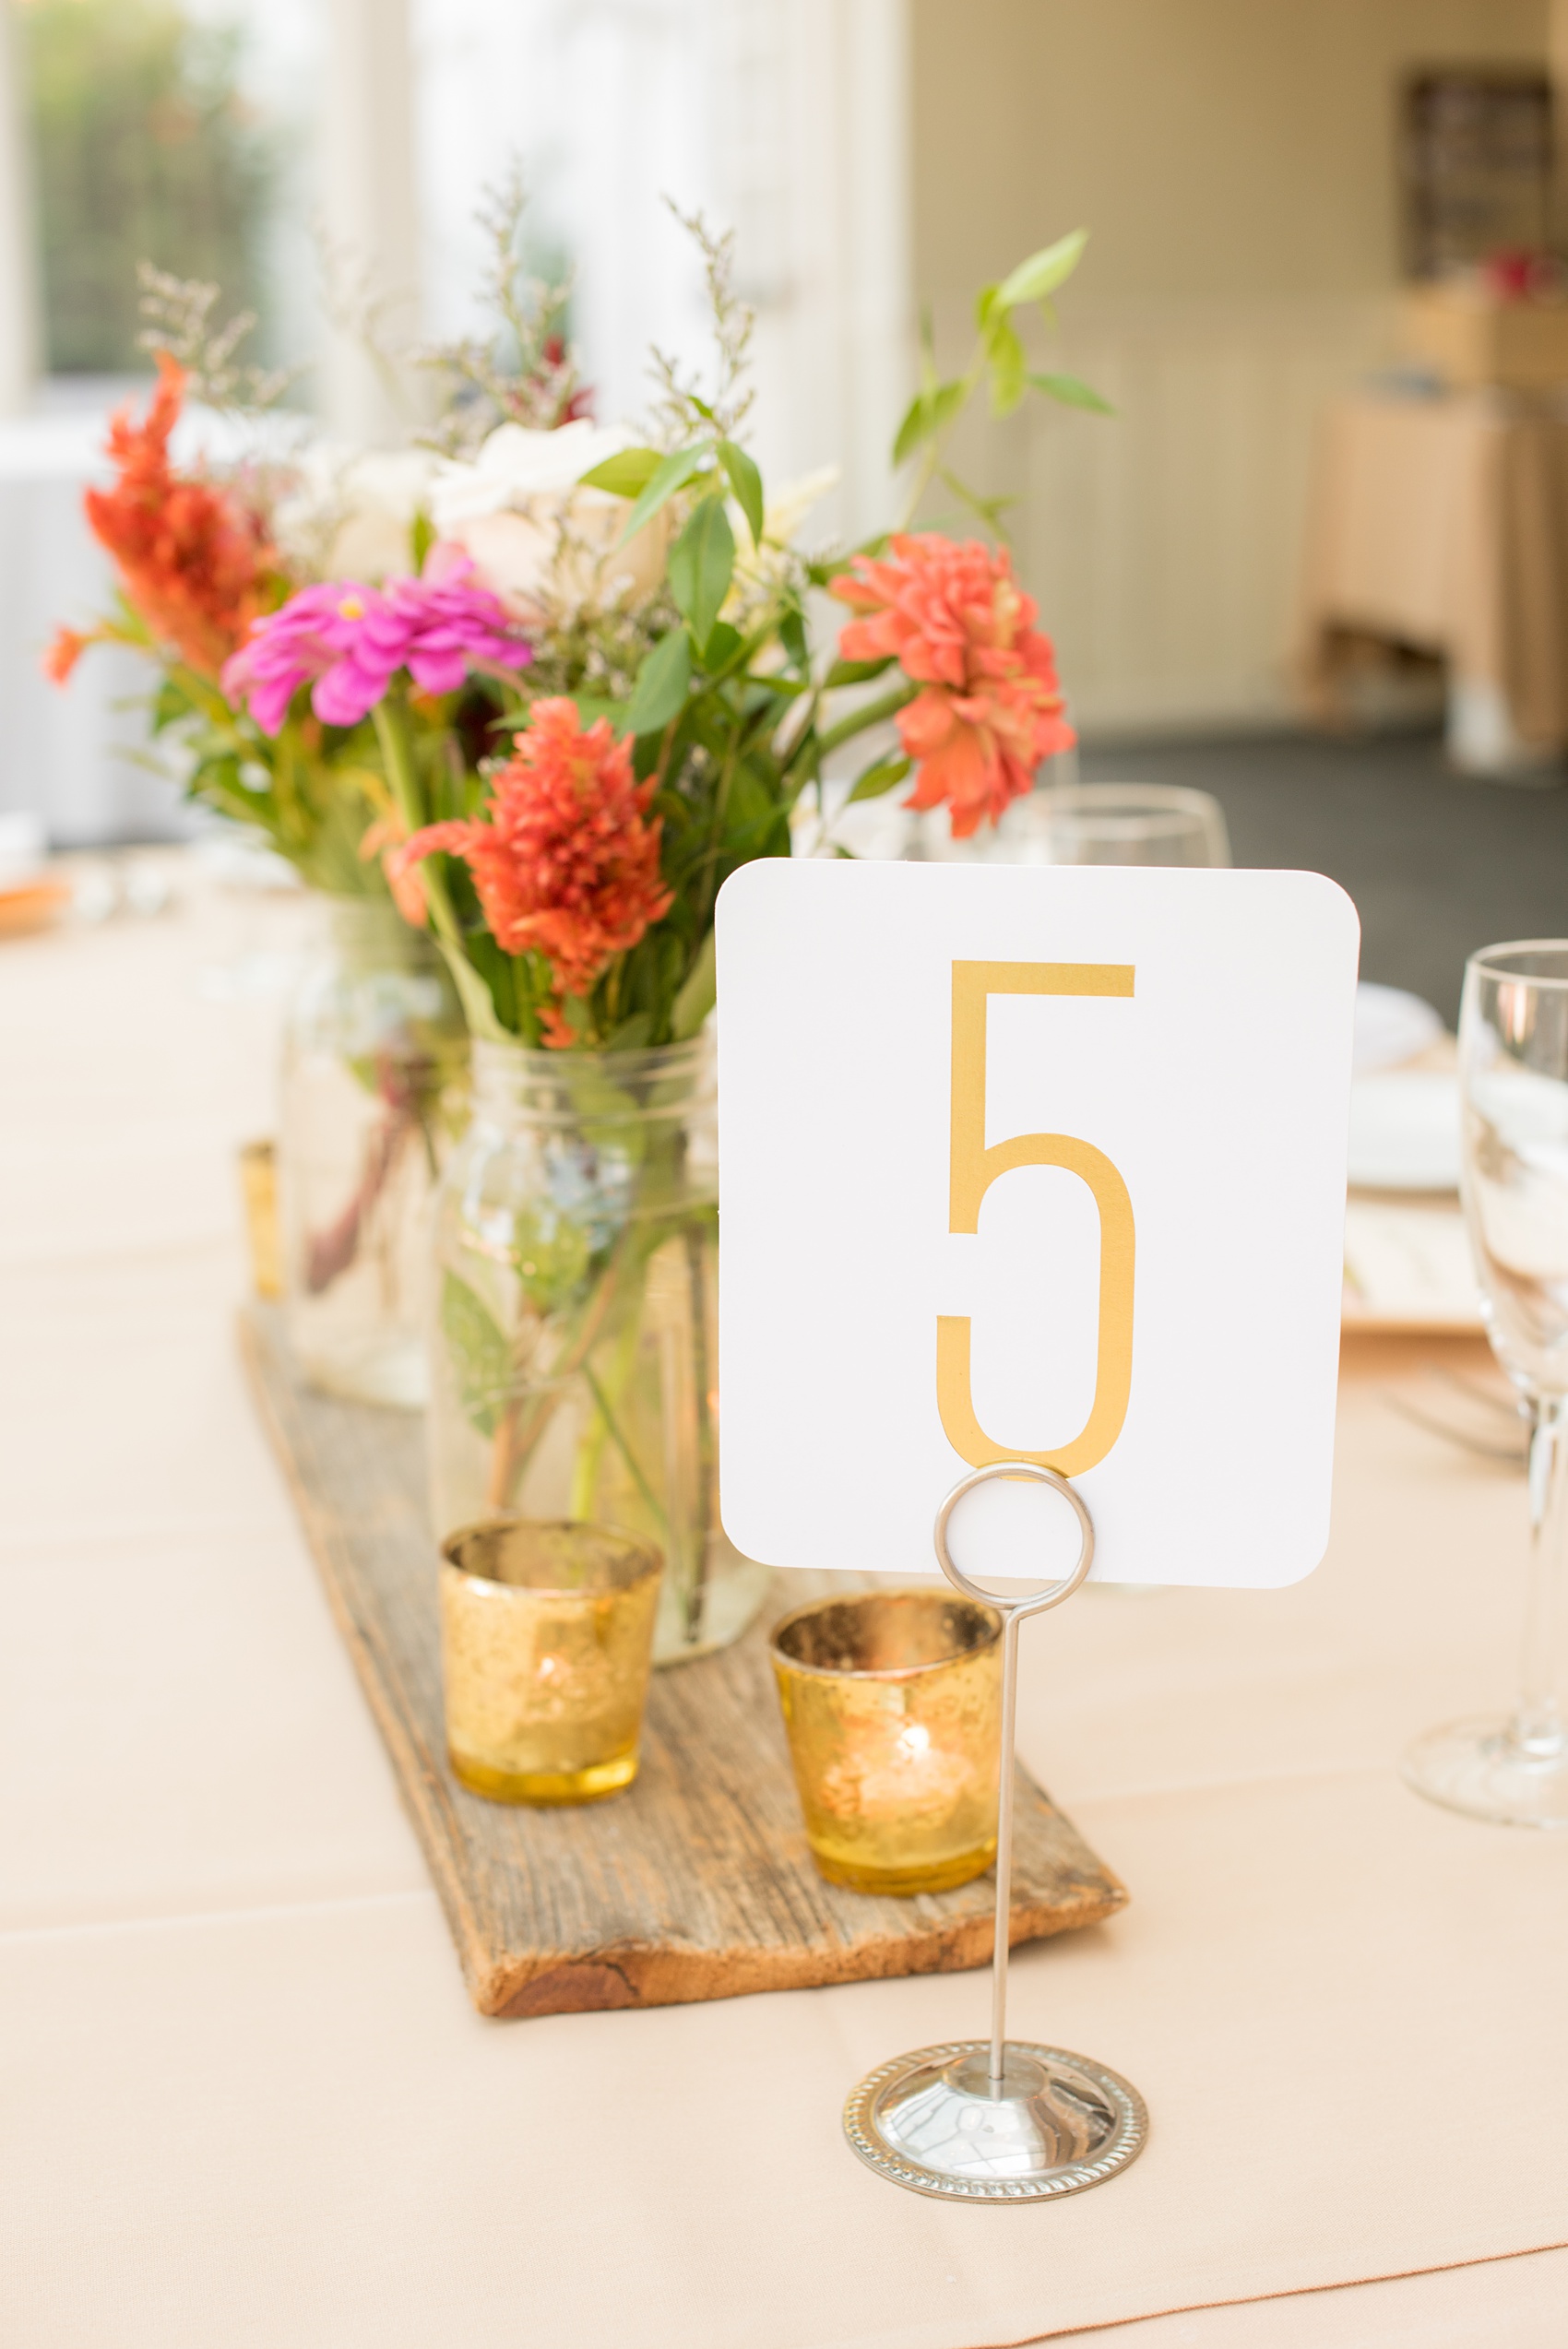 Mikkel Paige Photography photos of a wedding at Crabtree Kittle's House. Picture of the table centerpieces with gold numbers, wildflowers and mercury glass votive candleholders. 